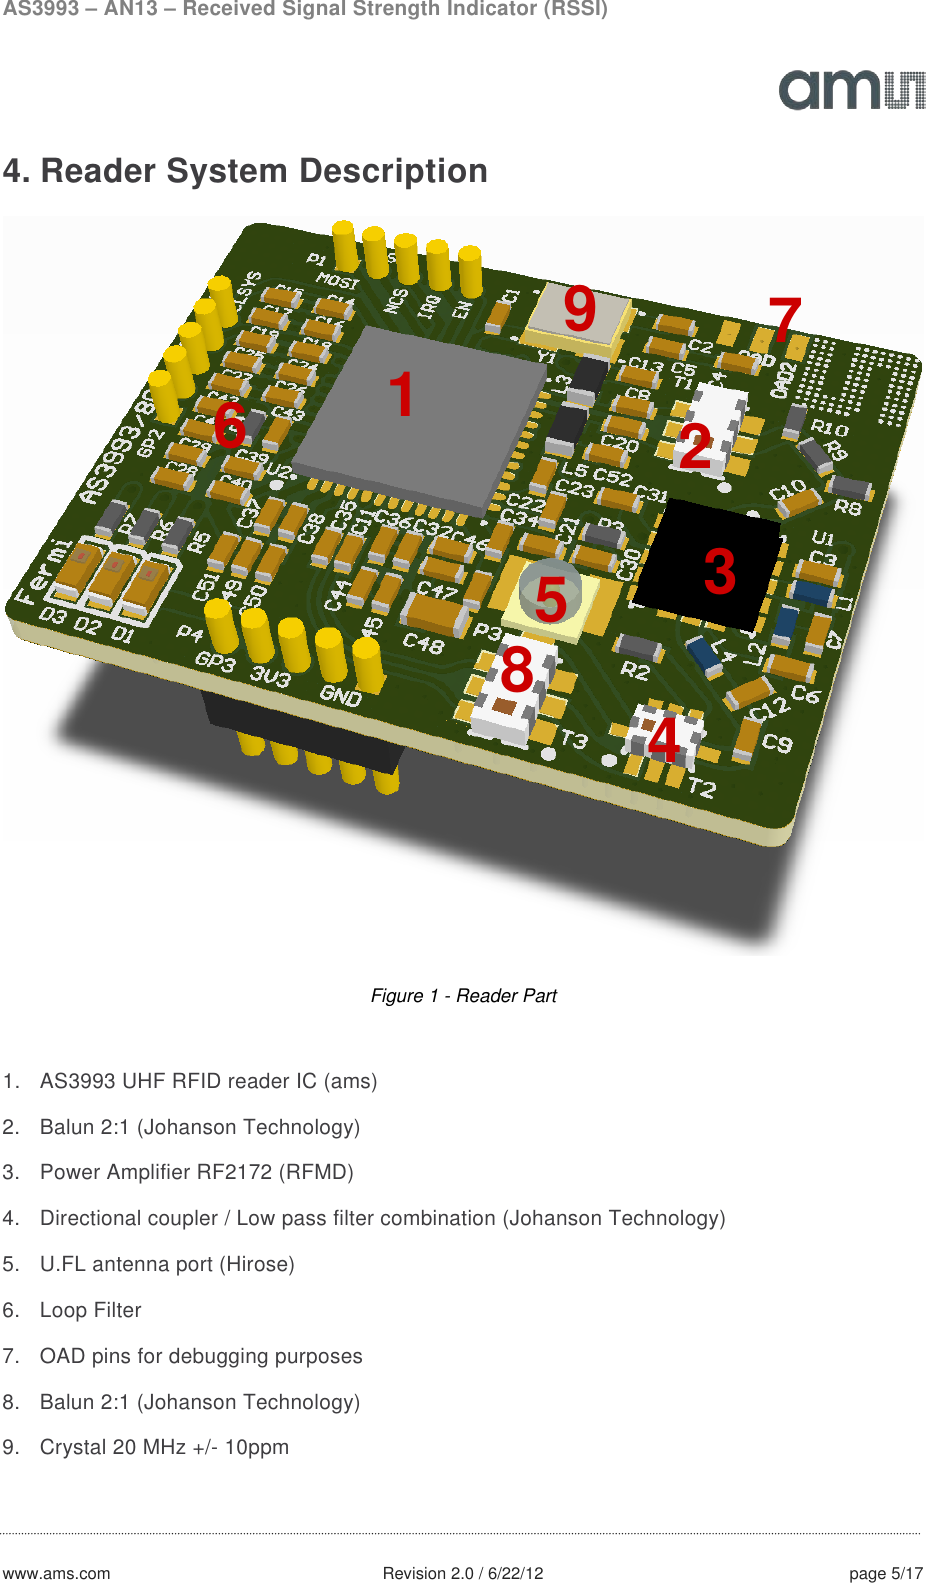 AS3993 – AN13 – Received Signal Strength Indicator (RSSI)  www.ams.com              Revision 2.0 / 6/22/12 page 5/17  4. Reader System Description  Figure 1 - Reader Part  1. AS3993 UHF RFID reader IC (ams) 2. Balun 2:1 (Johanson Technology) 3. Power Amplifier RF2172 (RFMD) 4. Directional coupler / Low pass filter combination (Johanson Technology) 5. U.FL antenna port (Hirose) 6. Loop Filter 7. OAD pins for debugging purposes 8. Balun 2:1 (Johanson Technology) 9. Crystal 20 MHz +/- 10ppm  1 3 2 5 4 6 7 8 9 